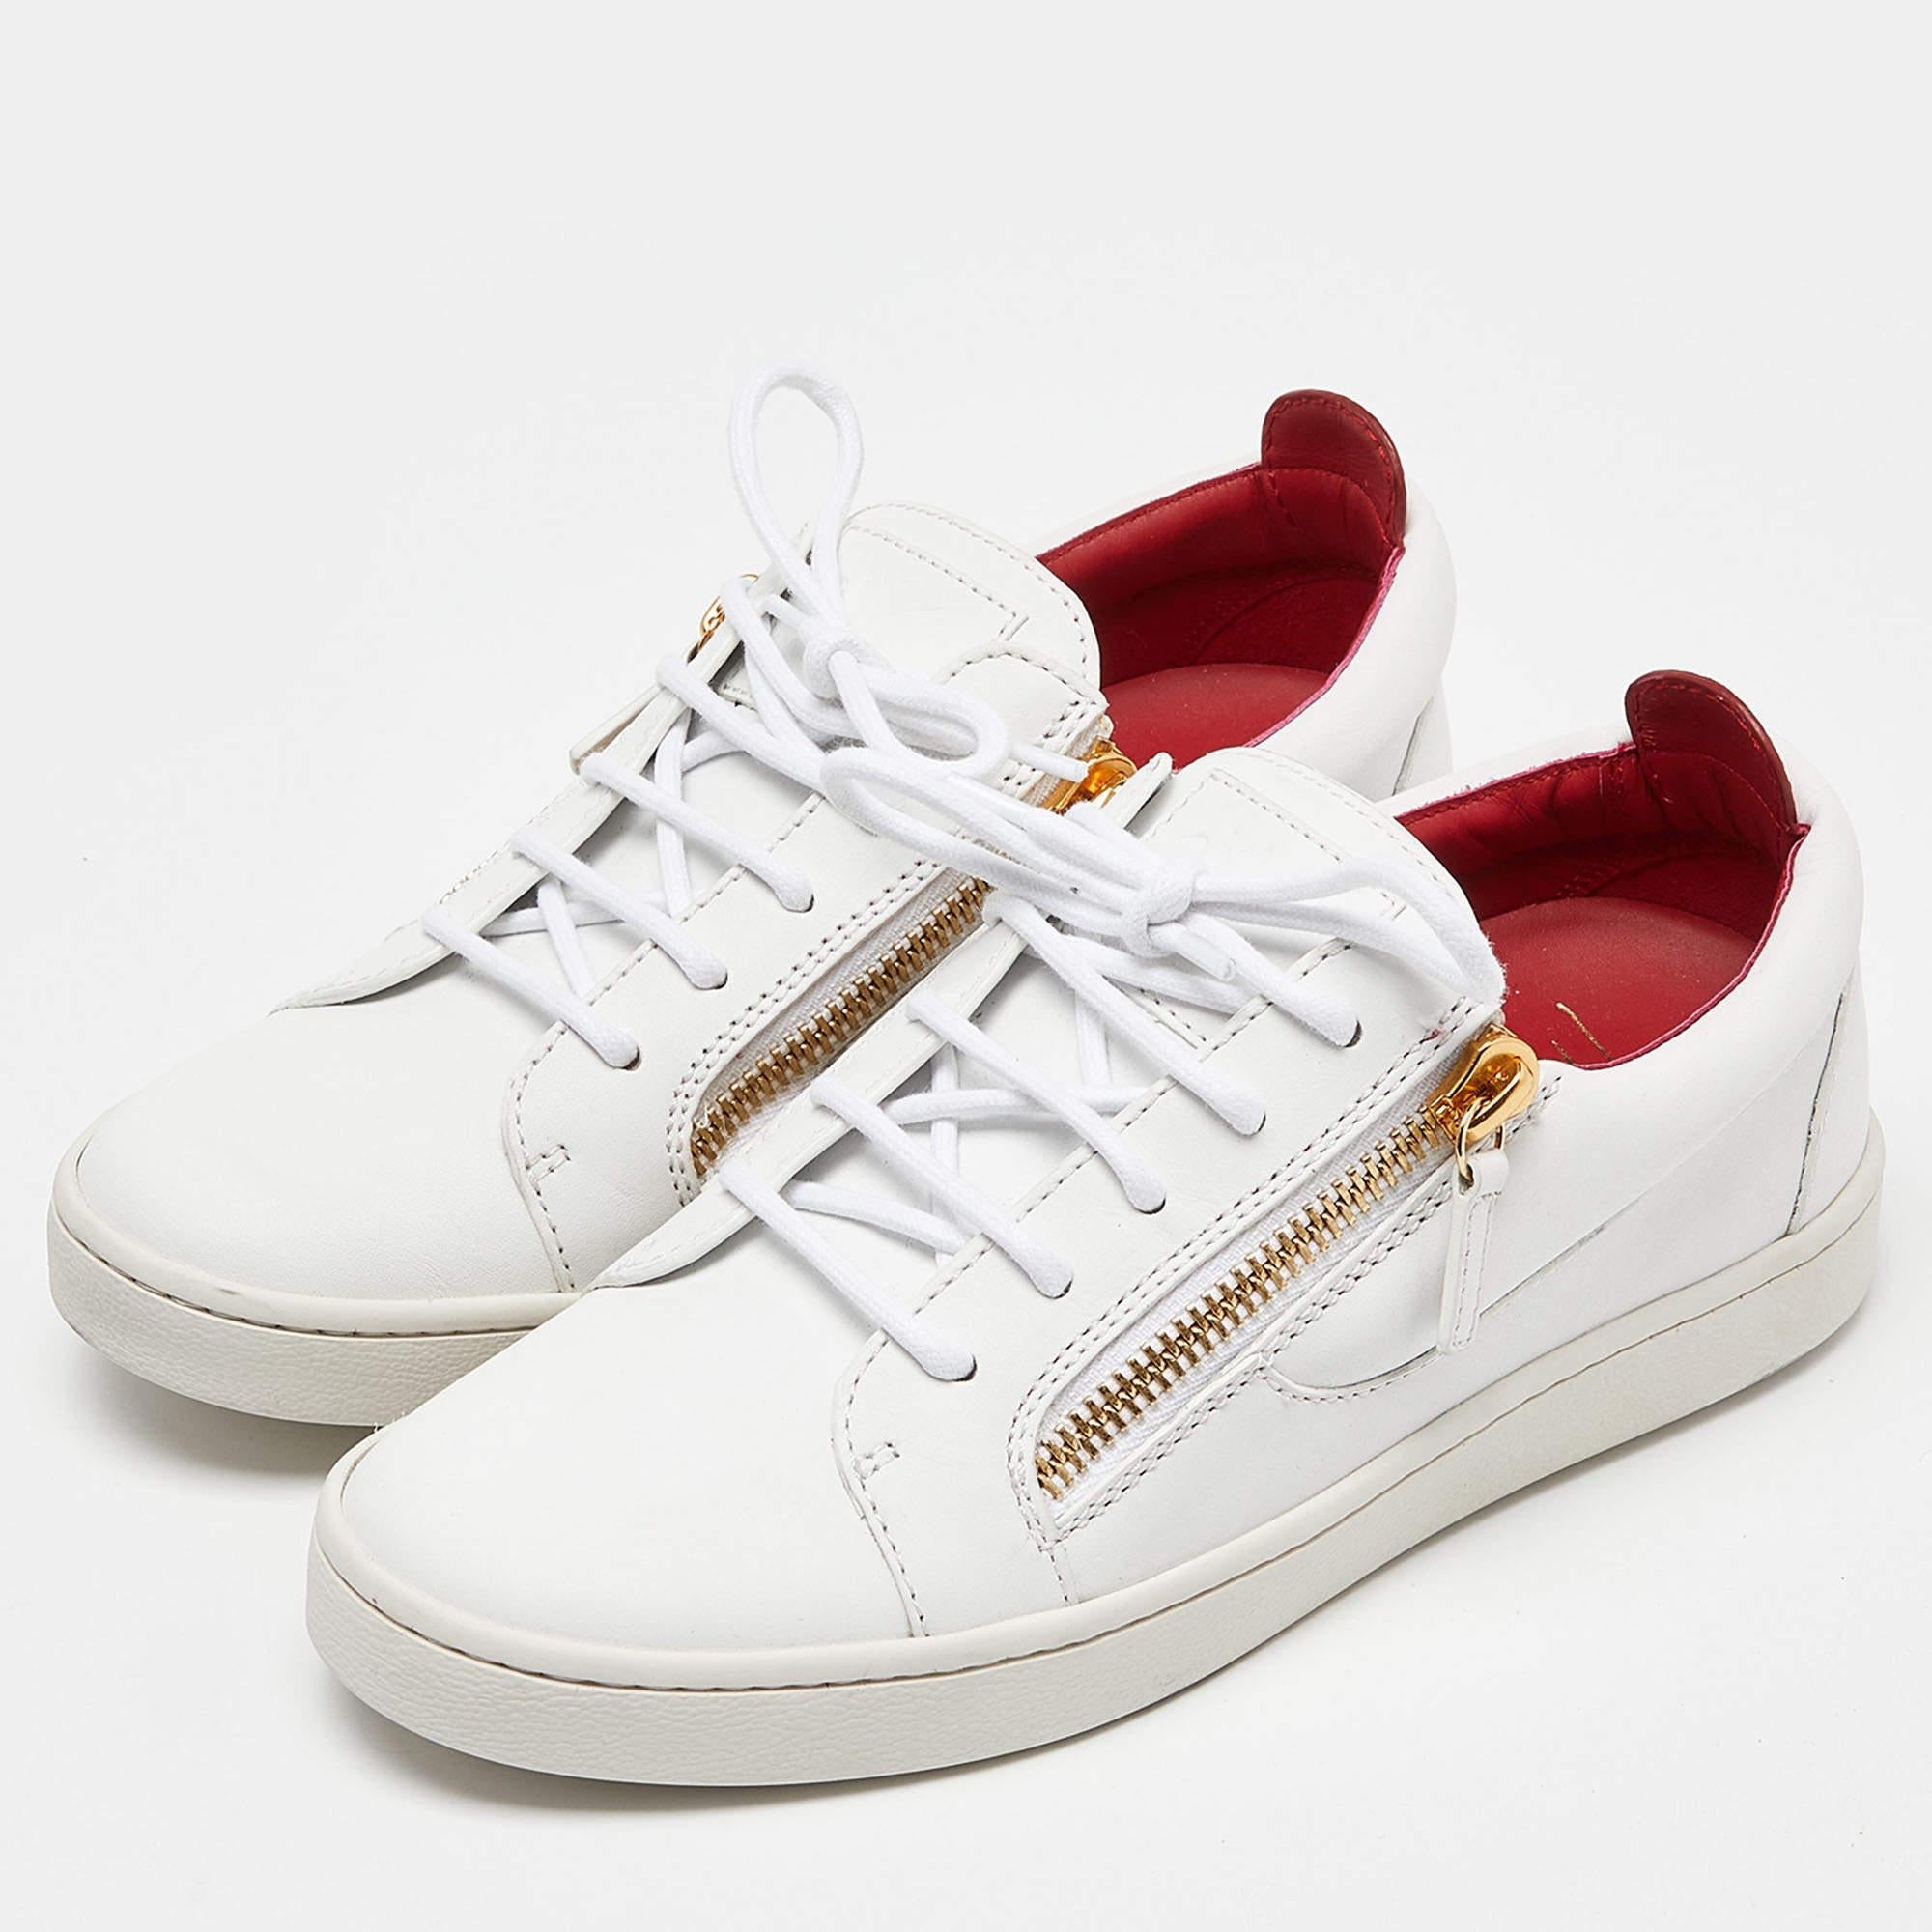 Giuseppe Zanotti White Leather Brek Low Top Sneakers Size 39 For Sale 3